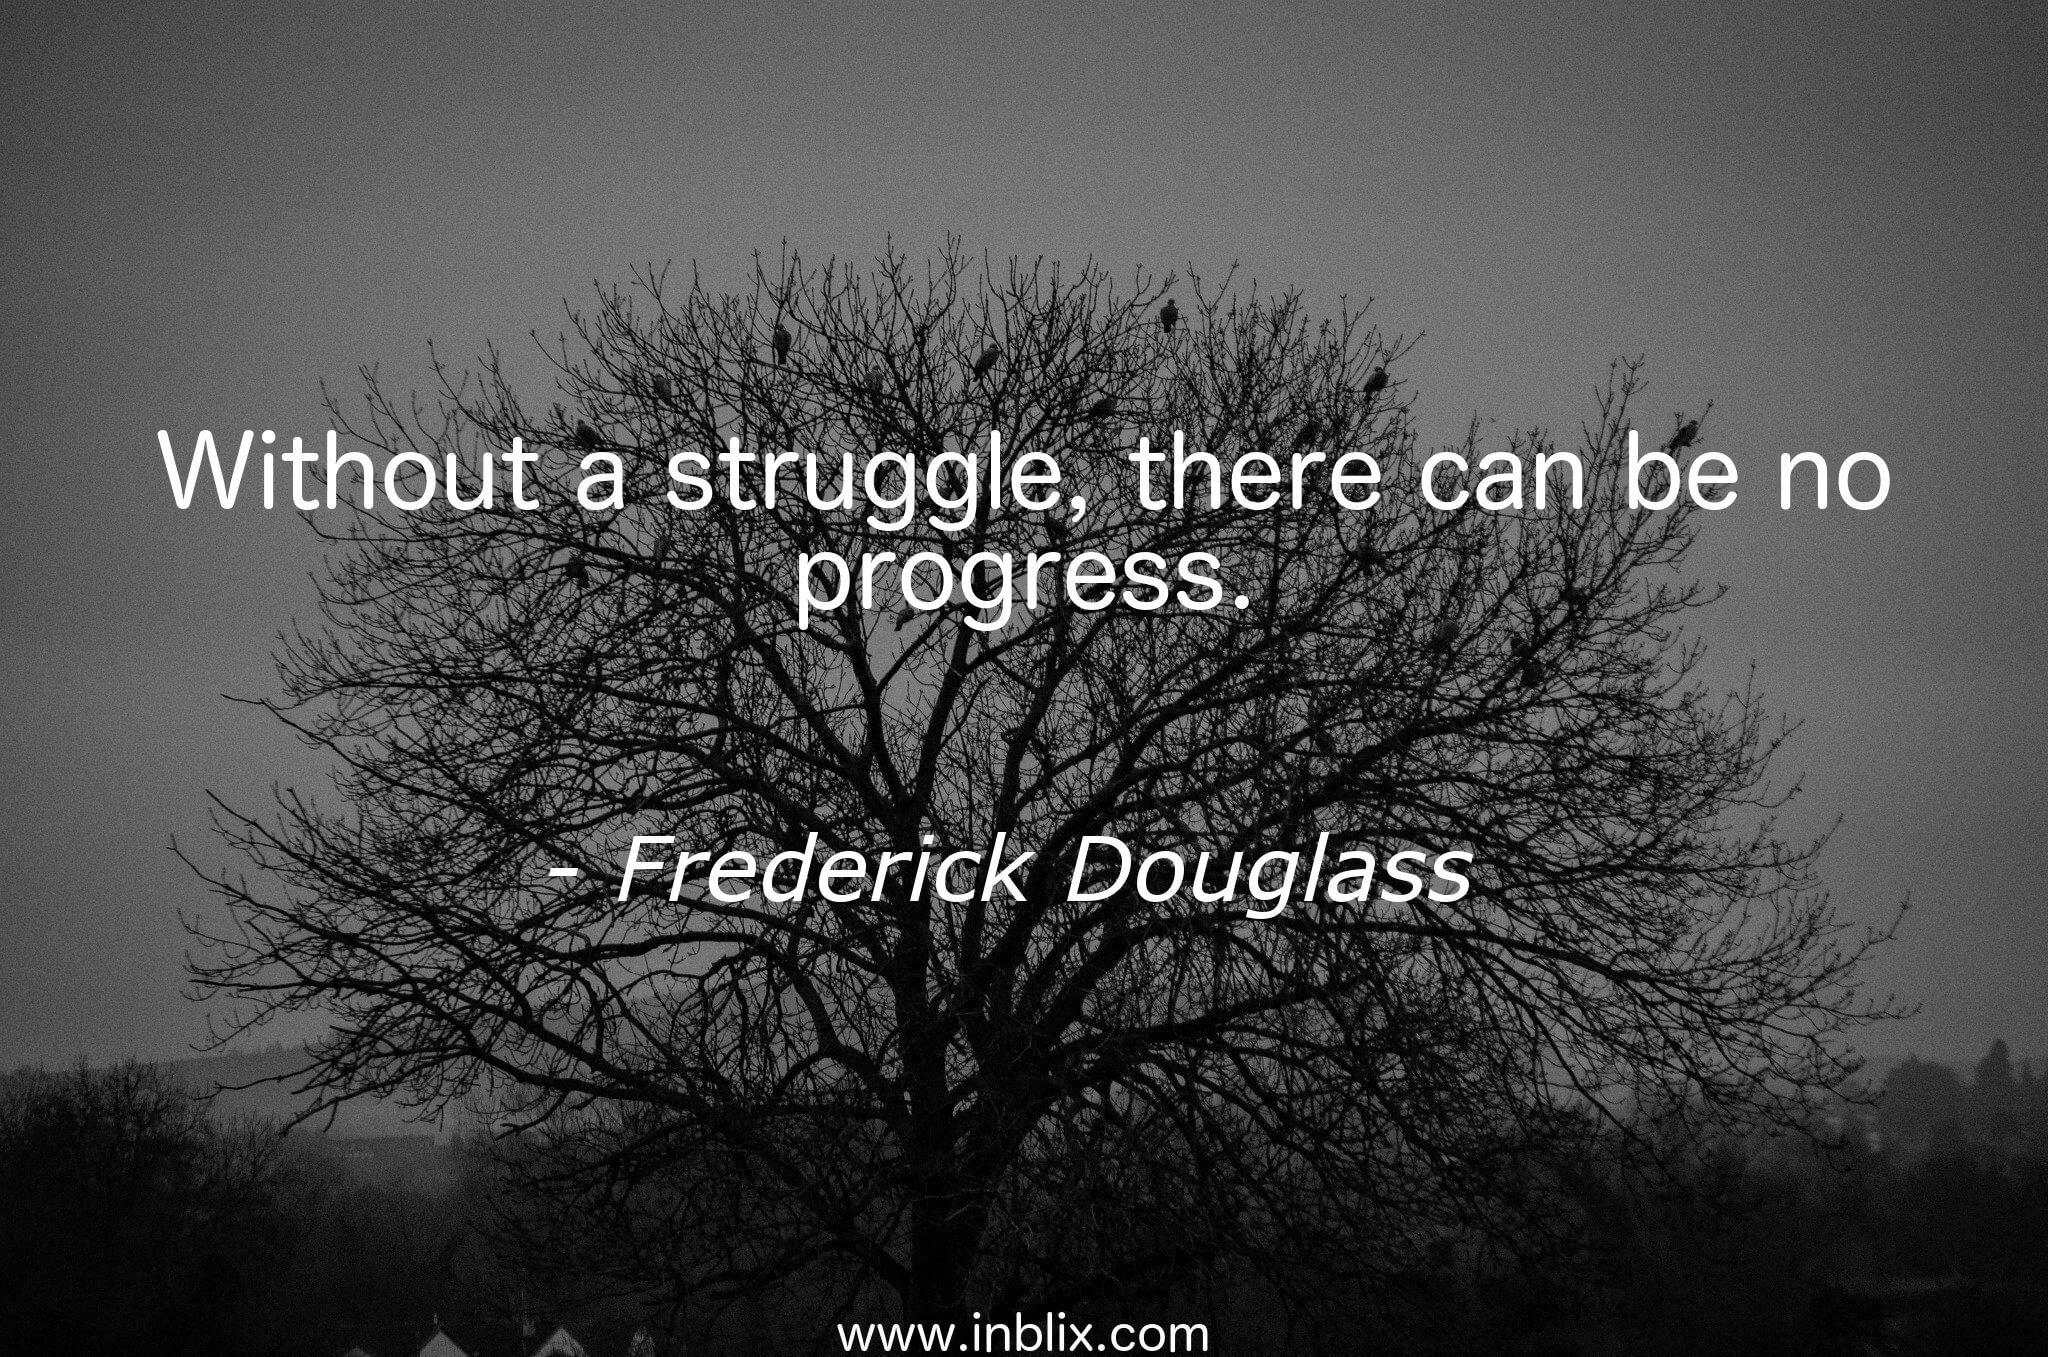 Without a struggle, there can